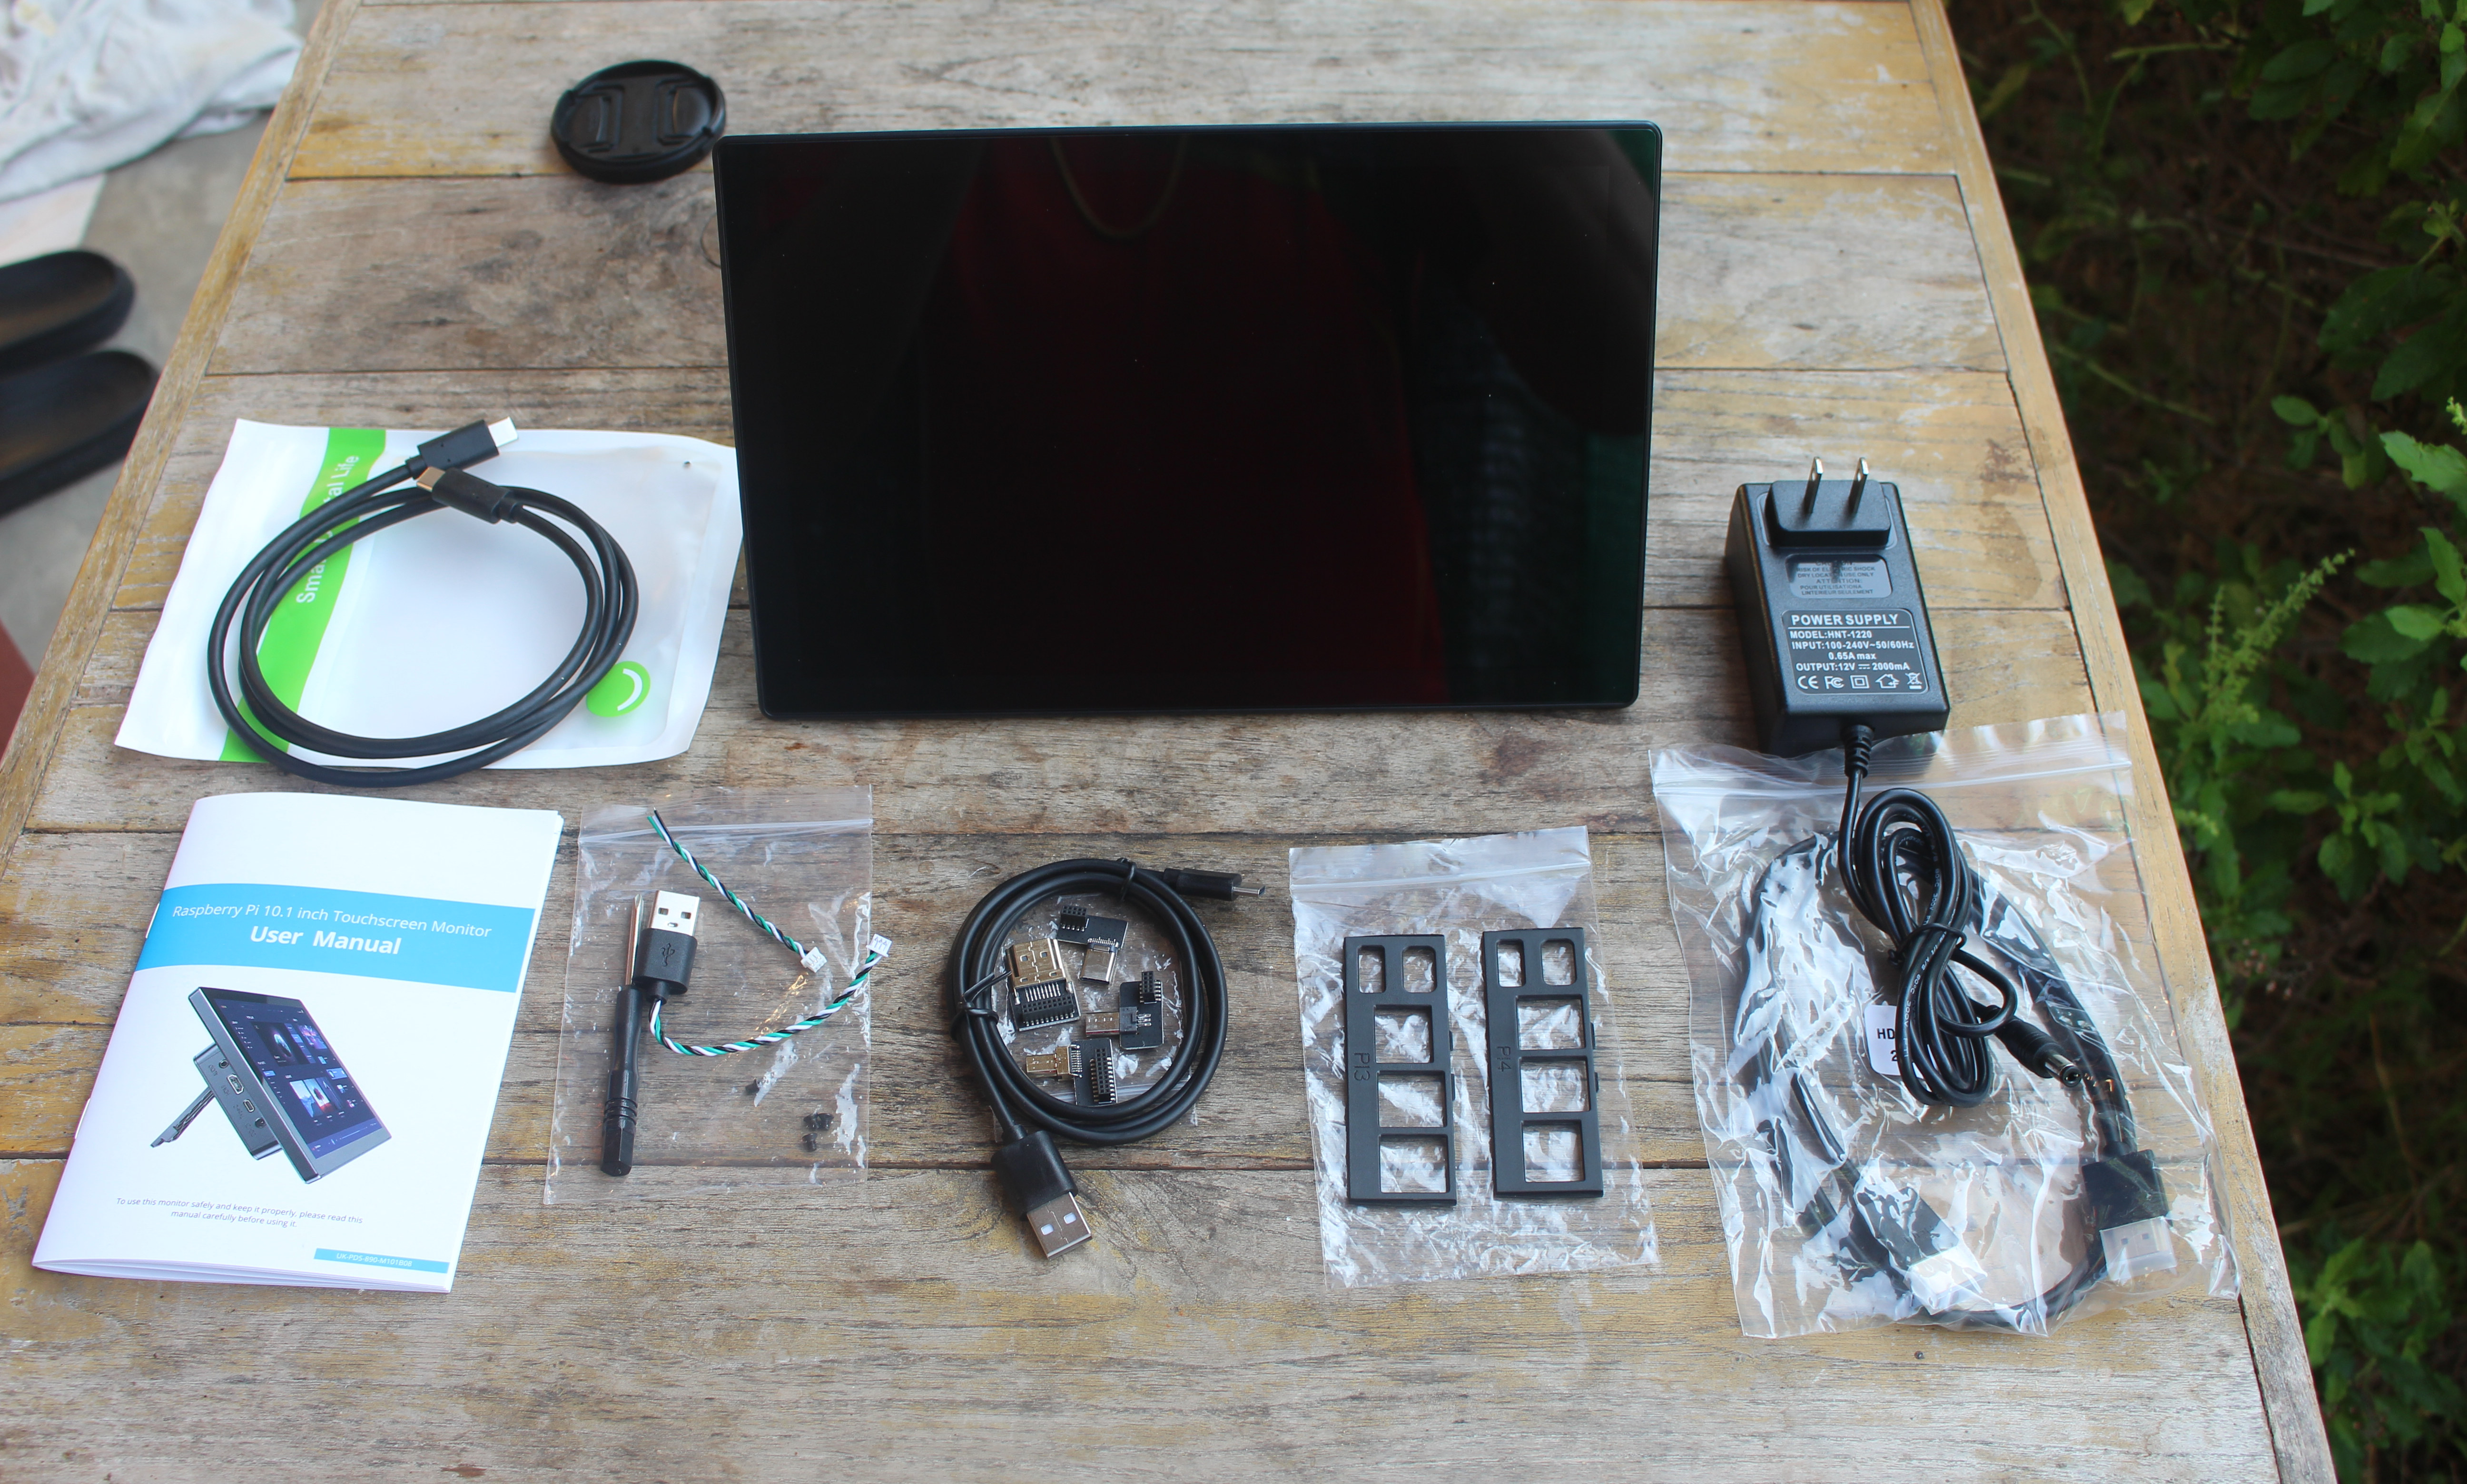 Trying the official Raspberry Pi touchscreen, our opinion – Howto Raspberry  Pi